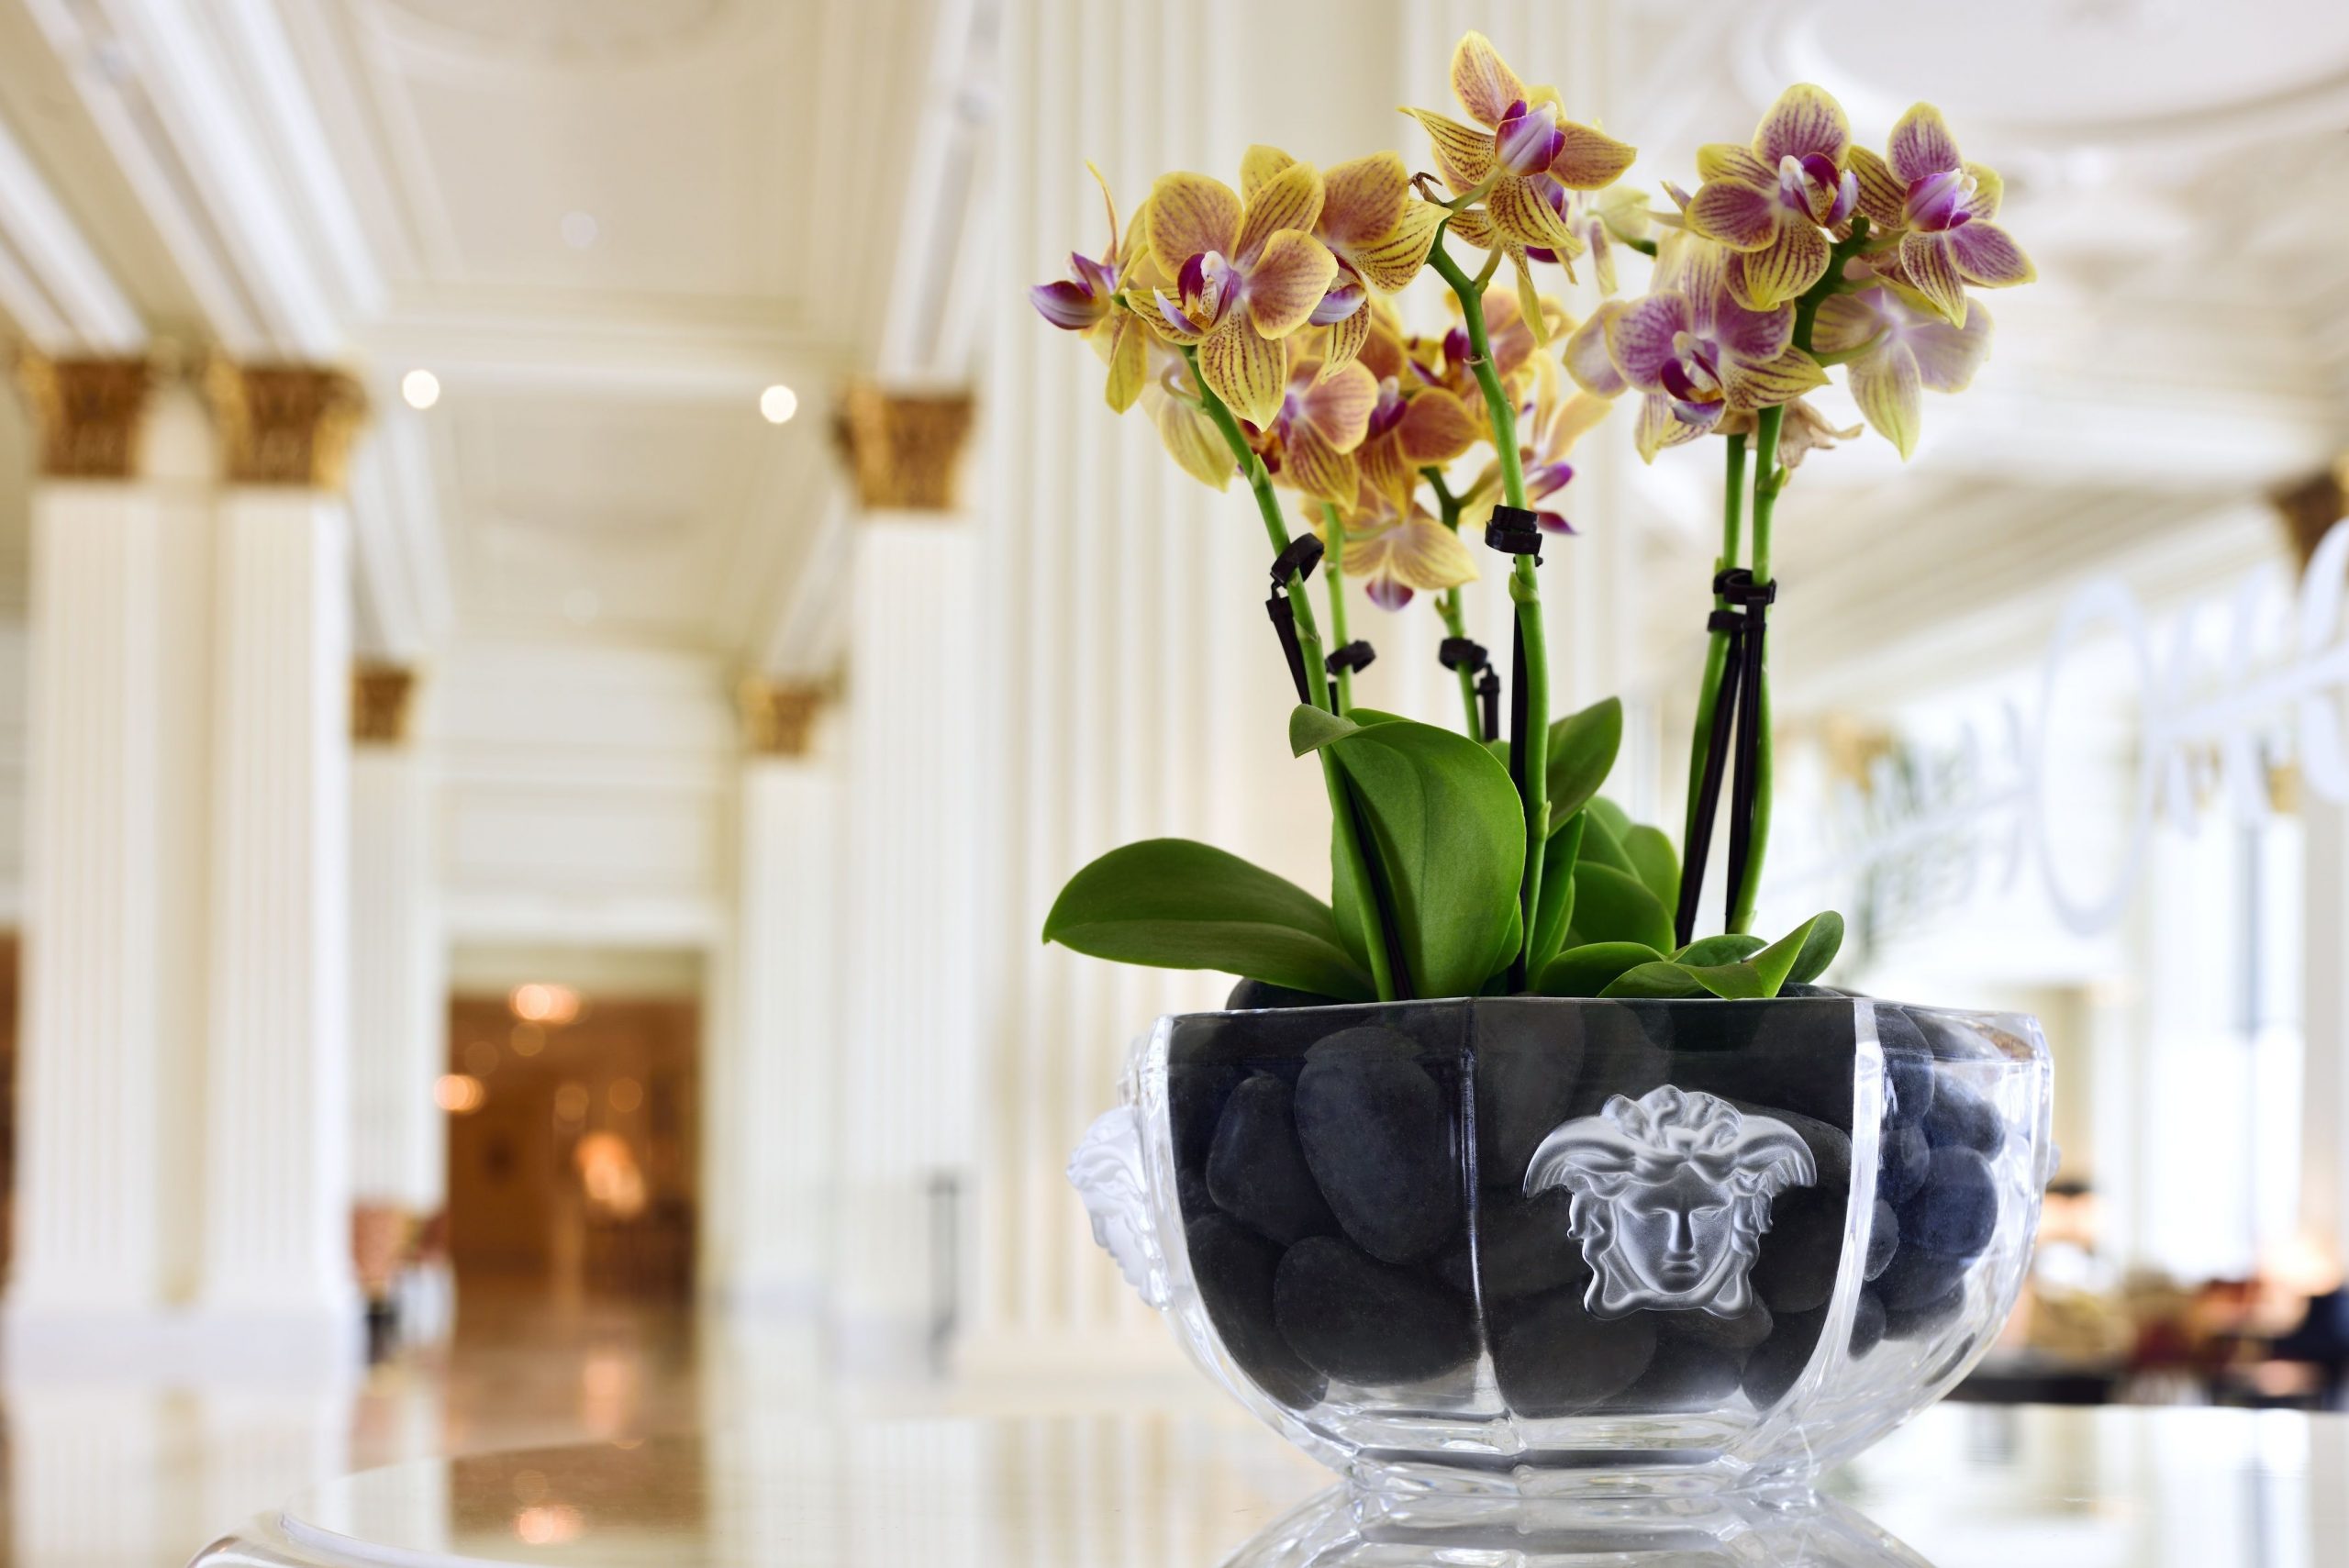 The Magnificent Versace Flower Vase At Palazzo Versace Dubai inside sizing 3500 X 2336